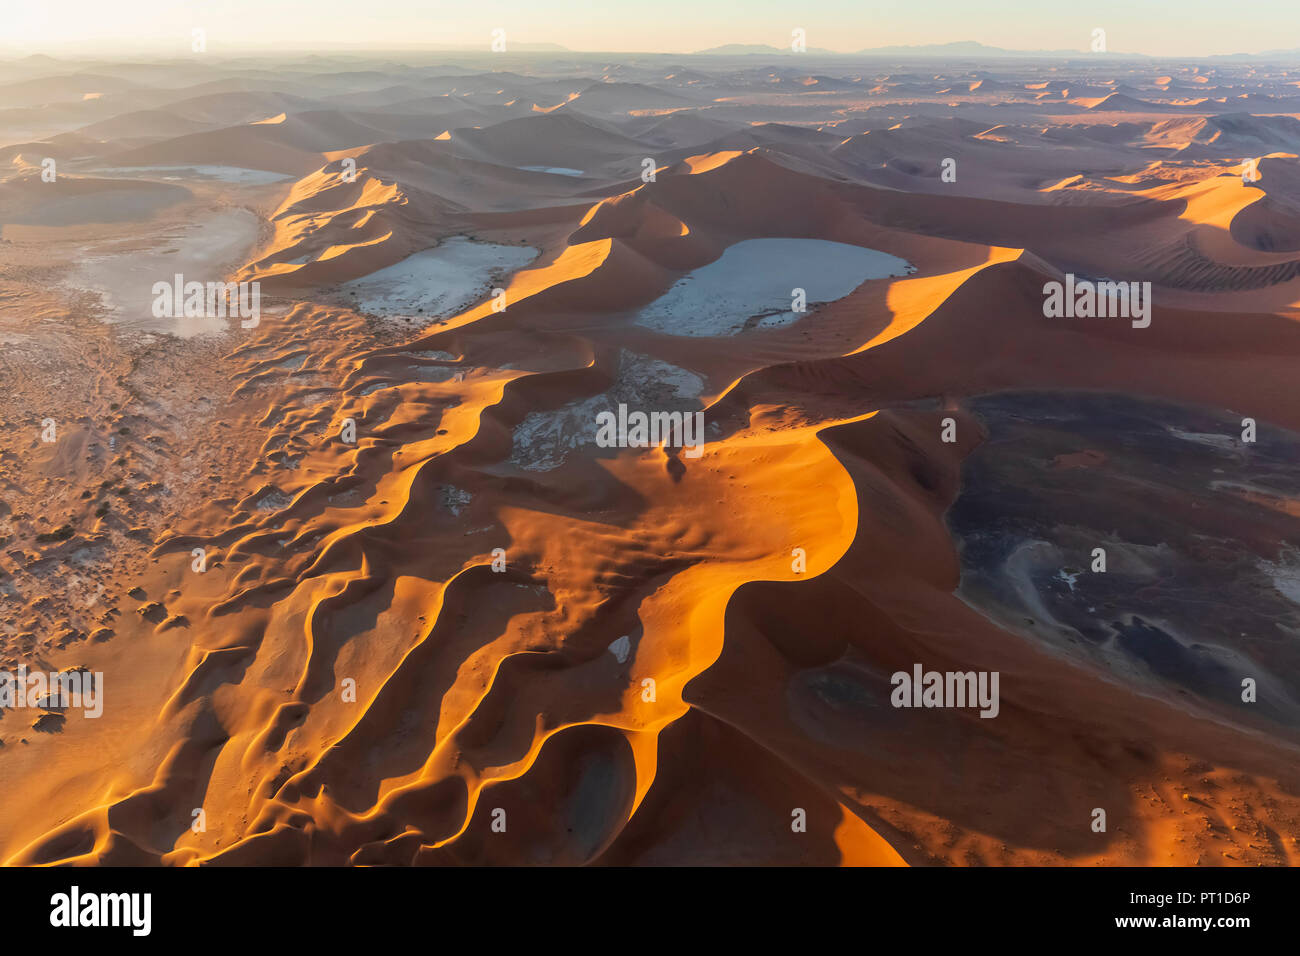 Africa, Namibia, Namib desert, Namib-Naukluft National Park, Aerial view of desert dunes, Dead Vlei and 'Big Daddy' in the morning light Stock Photo